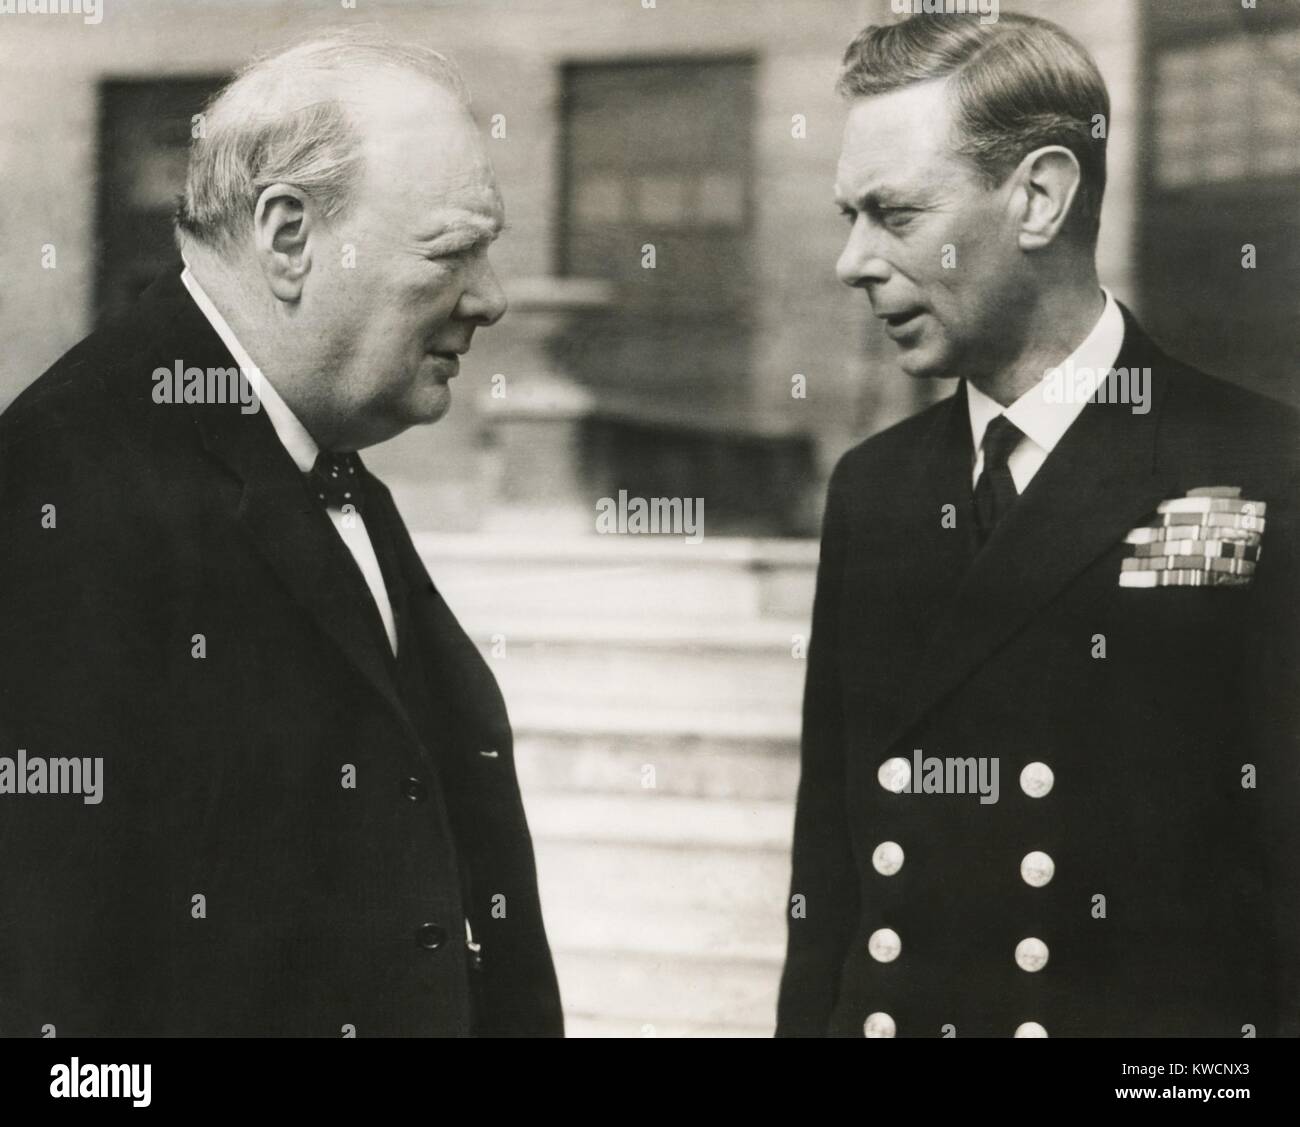 Winston Churchill with King George VI, May 8, 1948. They are in the garden of Buckingham Palace during the celebration of Victory in Europe. - (BSLOC 2014 17 43) Stock Photo